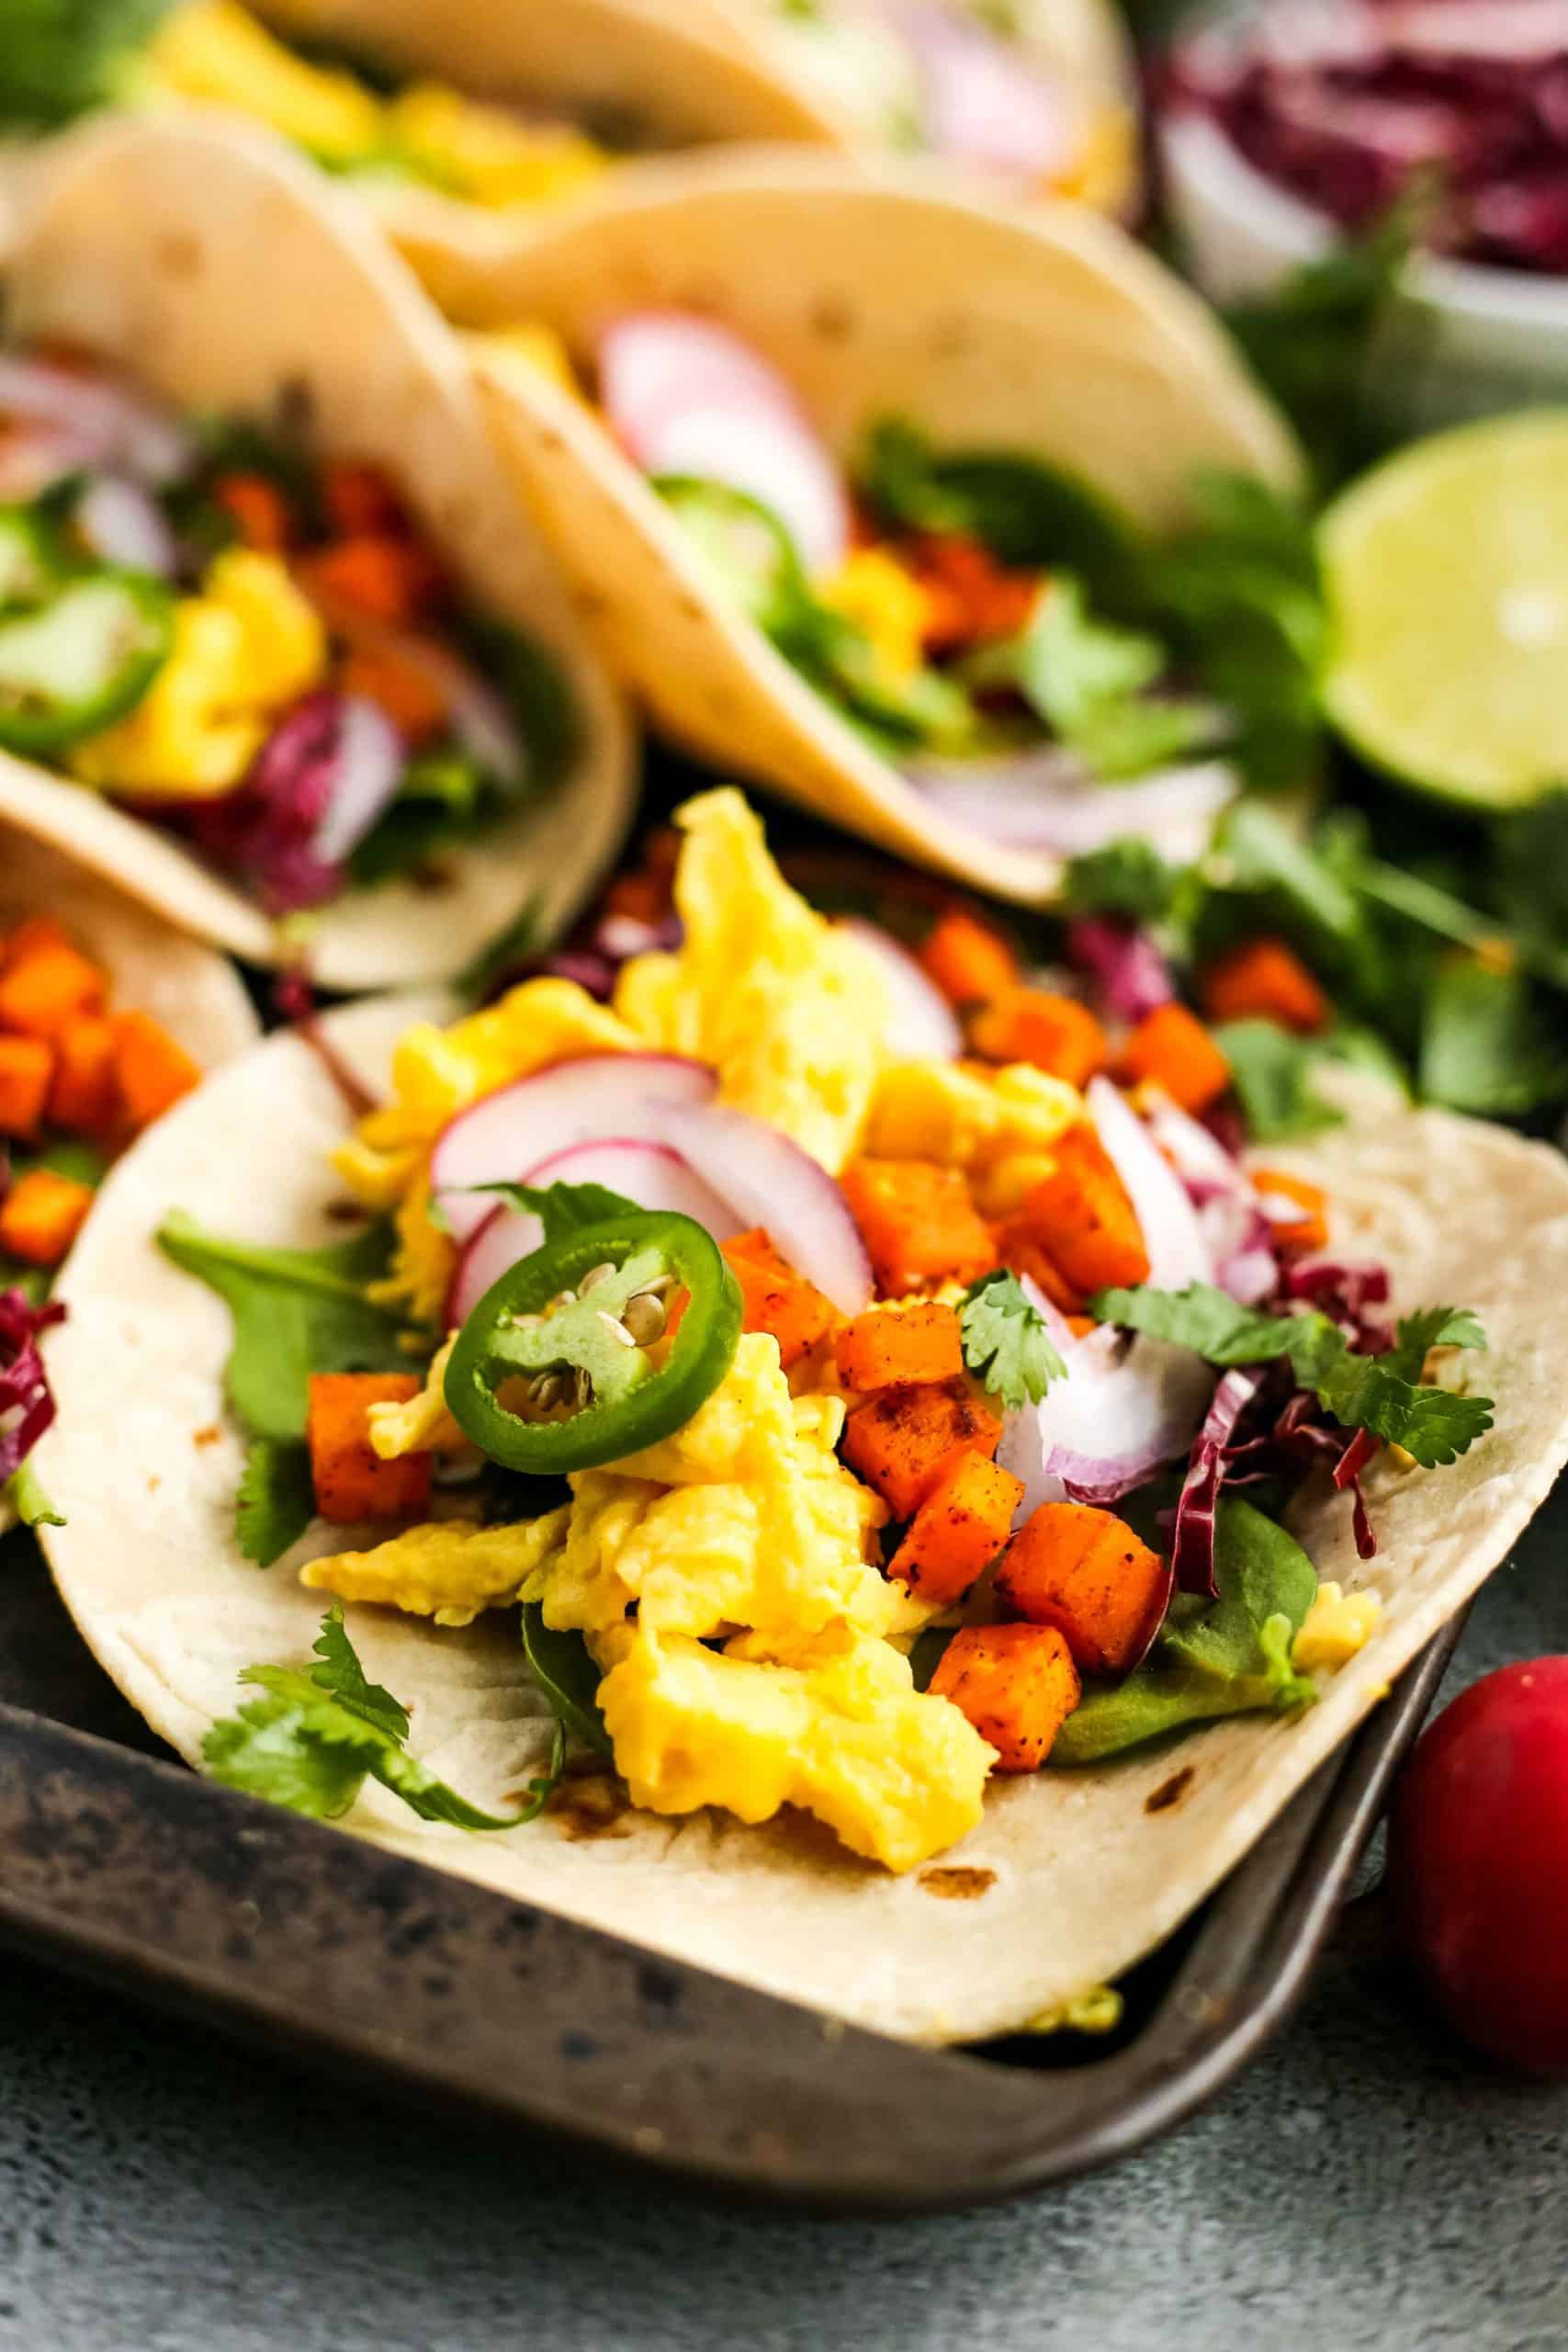 A colorful breakfast taco with scrambled eggs, sweet potatoes, and spring veggies lies open on a sheet pan, with more tacos in the background